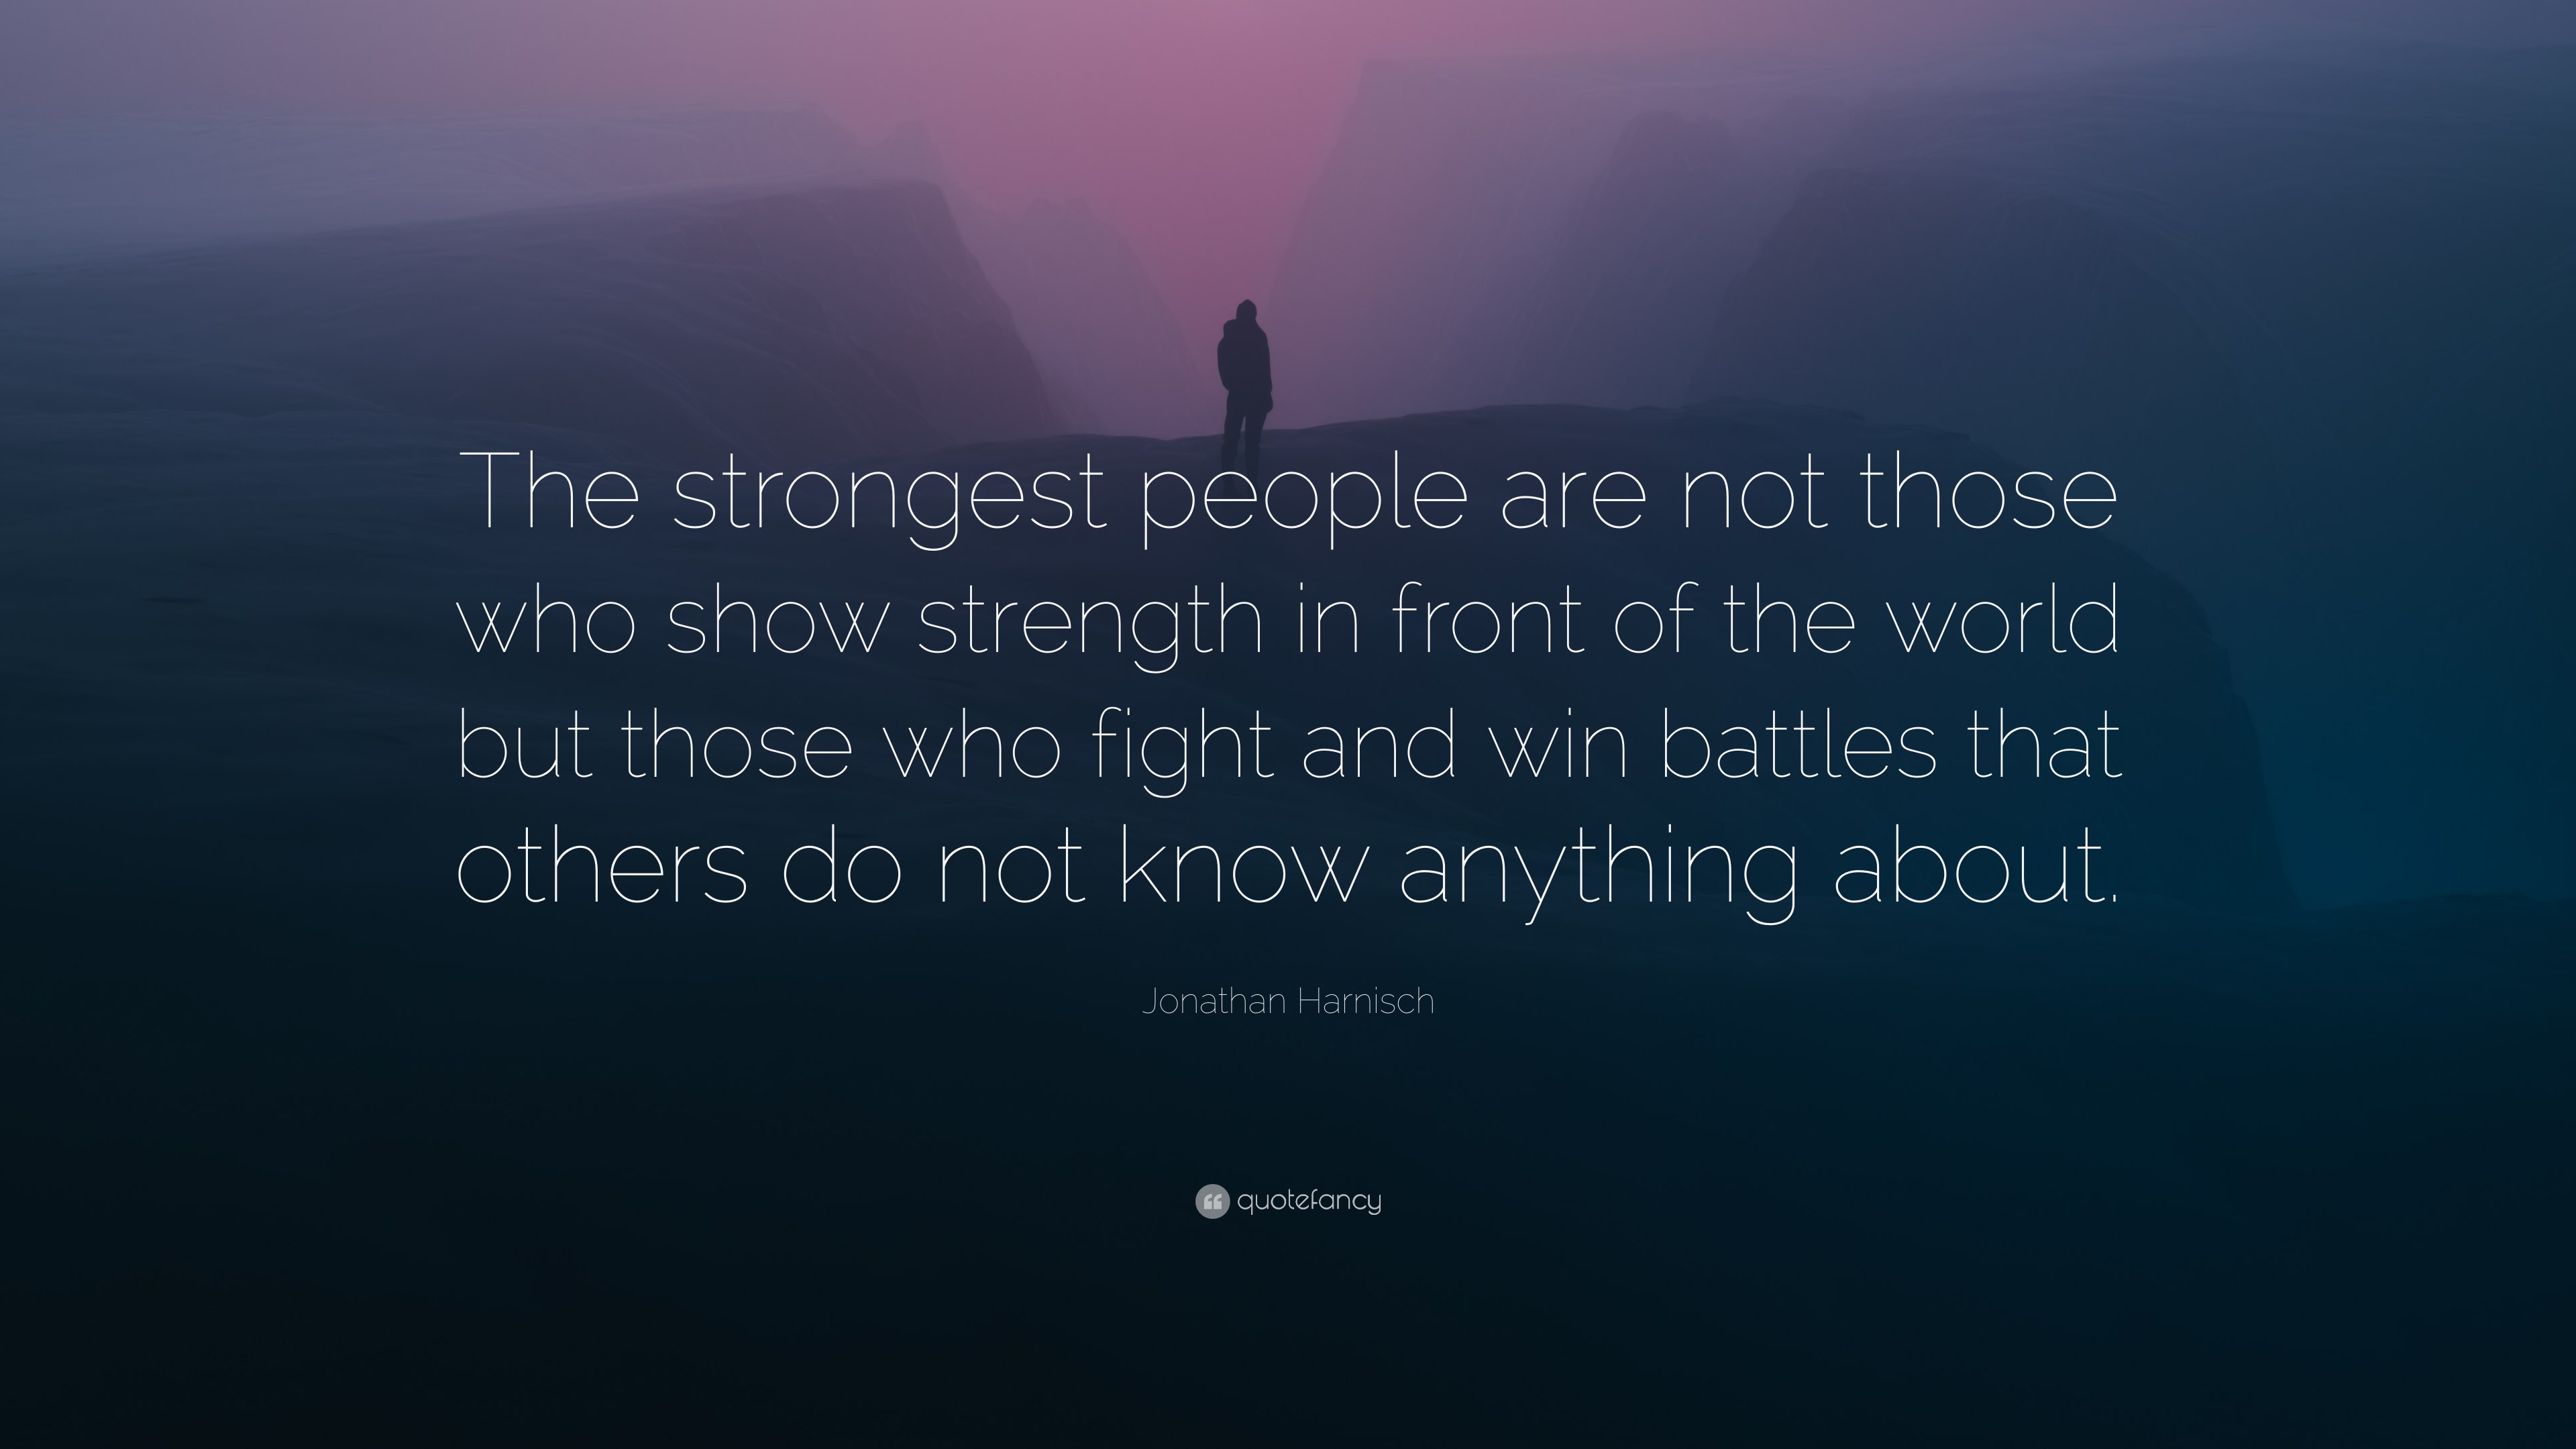 Jonathan Harnisch Quote: “The strongest people are not those who show ...